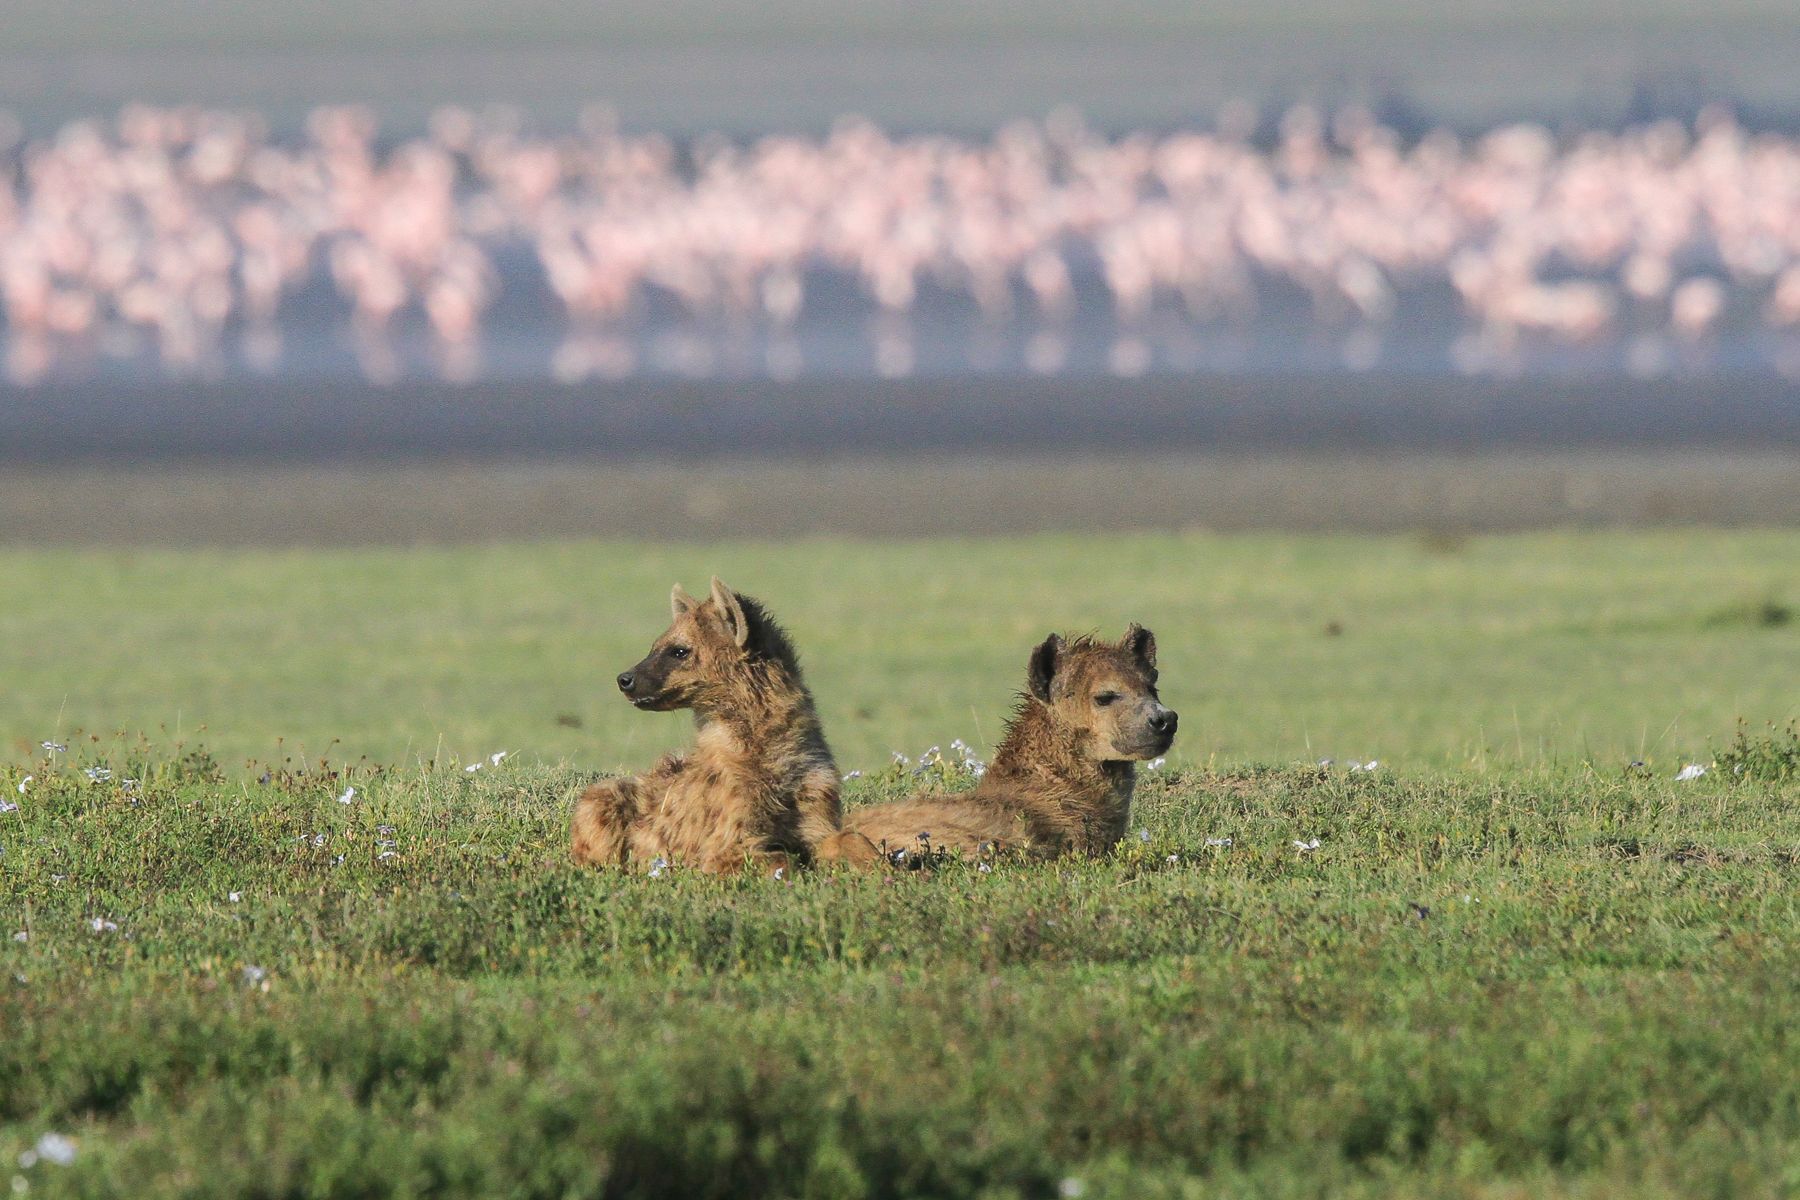 Ngorongoro's mammals, like these Spotted Hyaenas, often have a pink backdrop owing to the many flamingoes at the crater lake